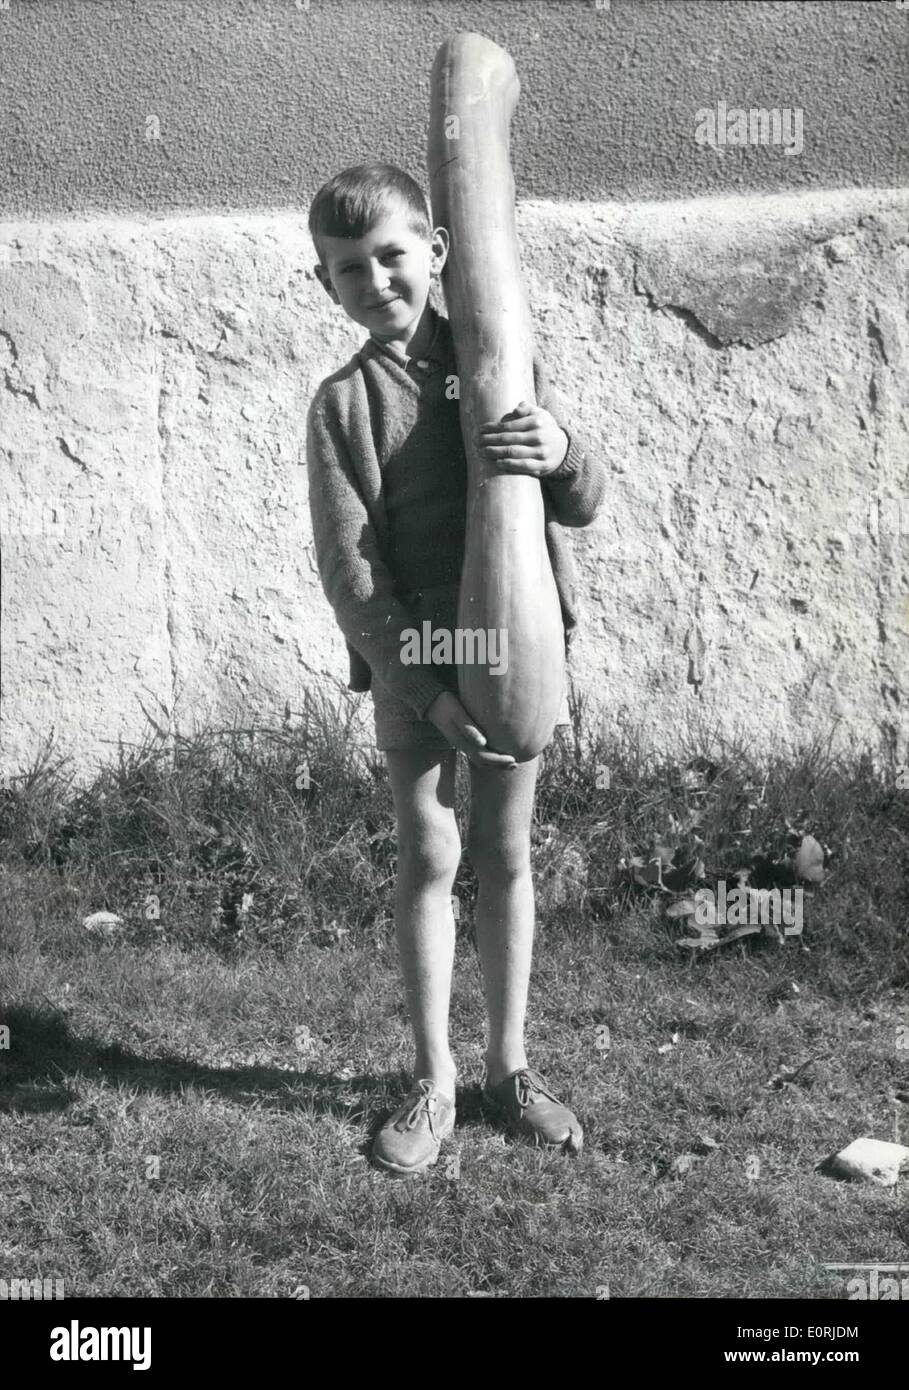 Oct. 10, 1959 - This is not a Bazooka, it is a Pumpkin: this giant Pumpkin (I meter io, i0 kilos) was grown in the garden of a french farmer at Forcalquier, southern, France. The Farmer's grandson seems quite proud to display the huge vegetable. Stock Photo